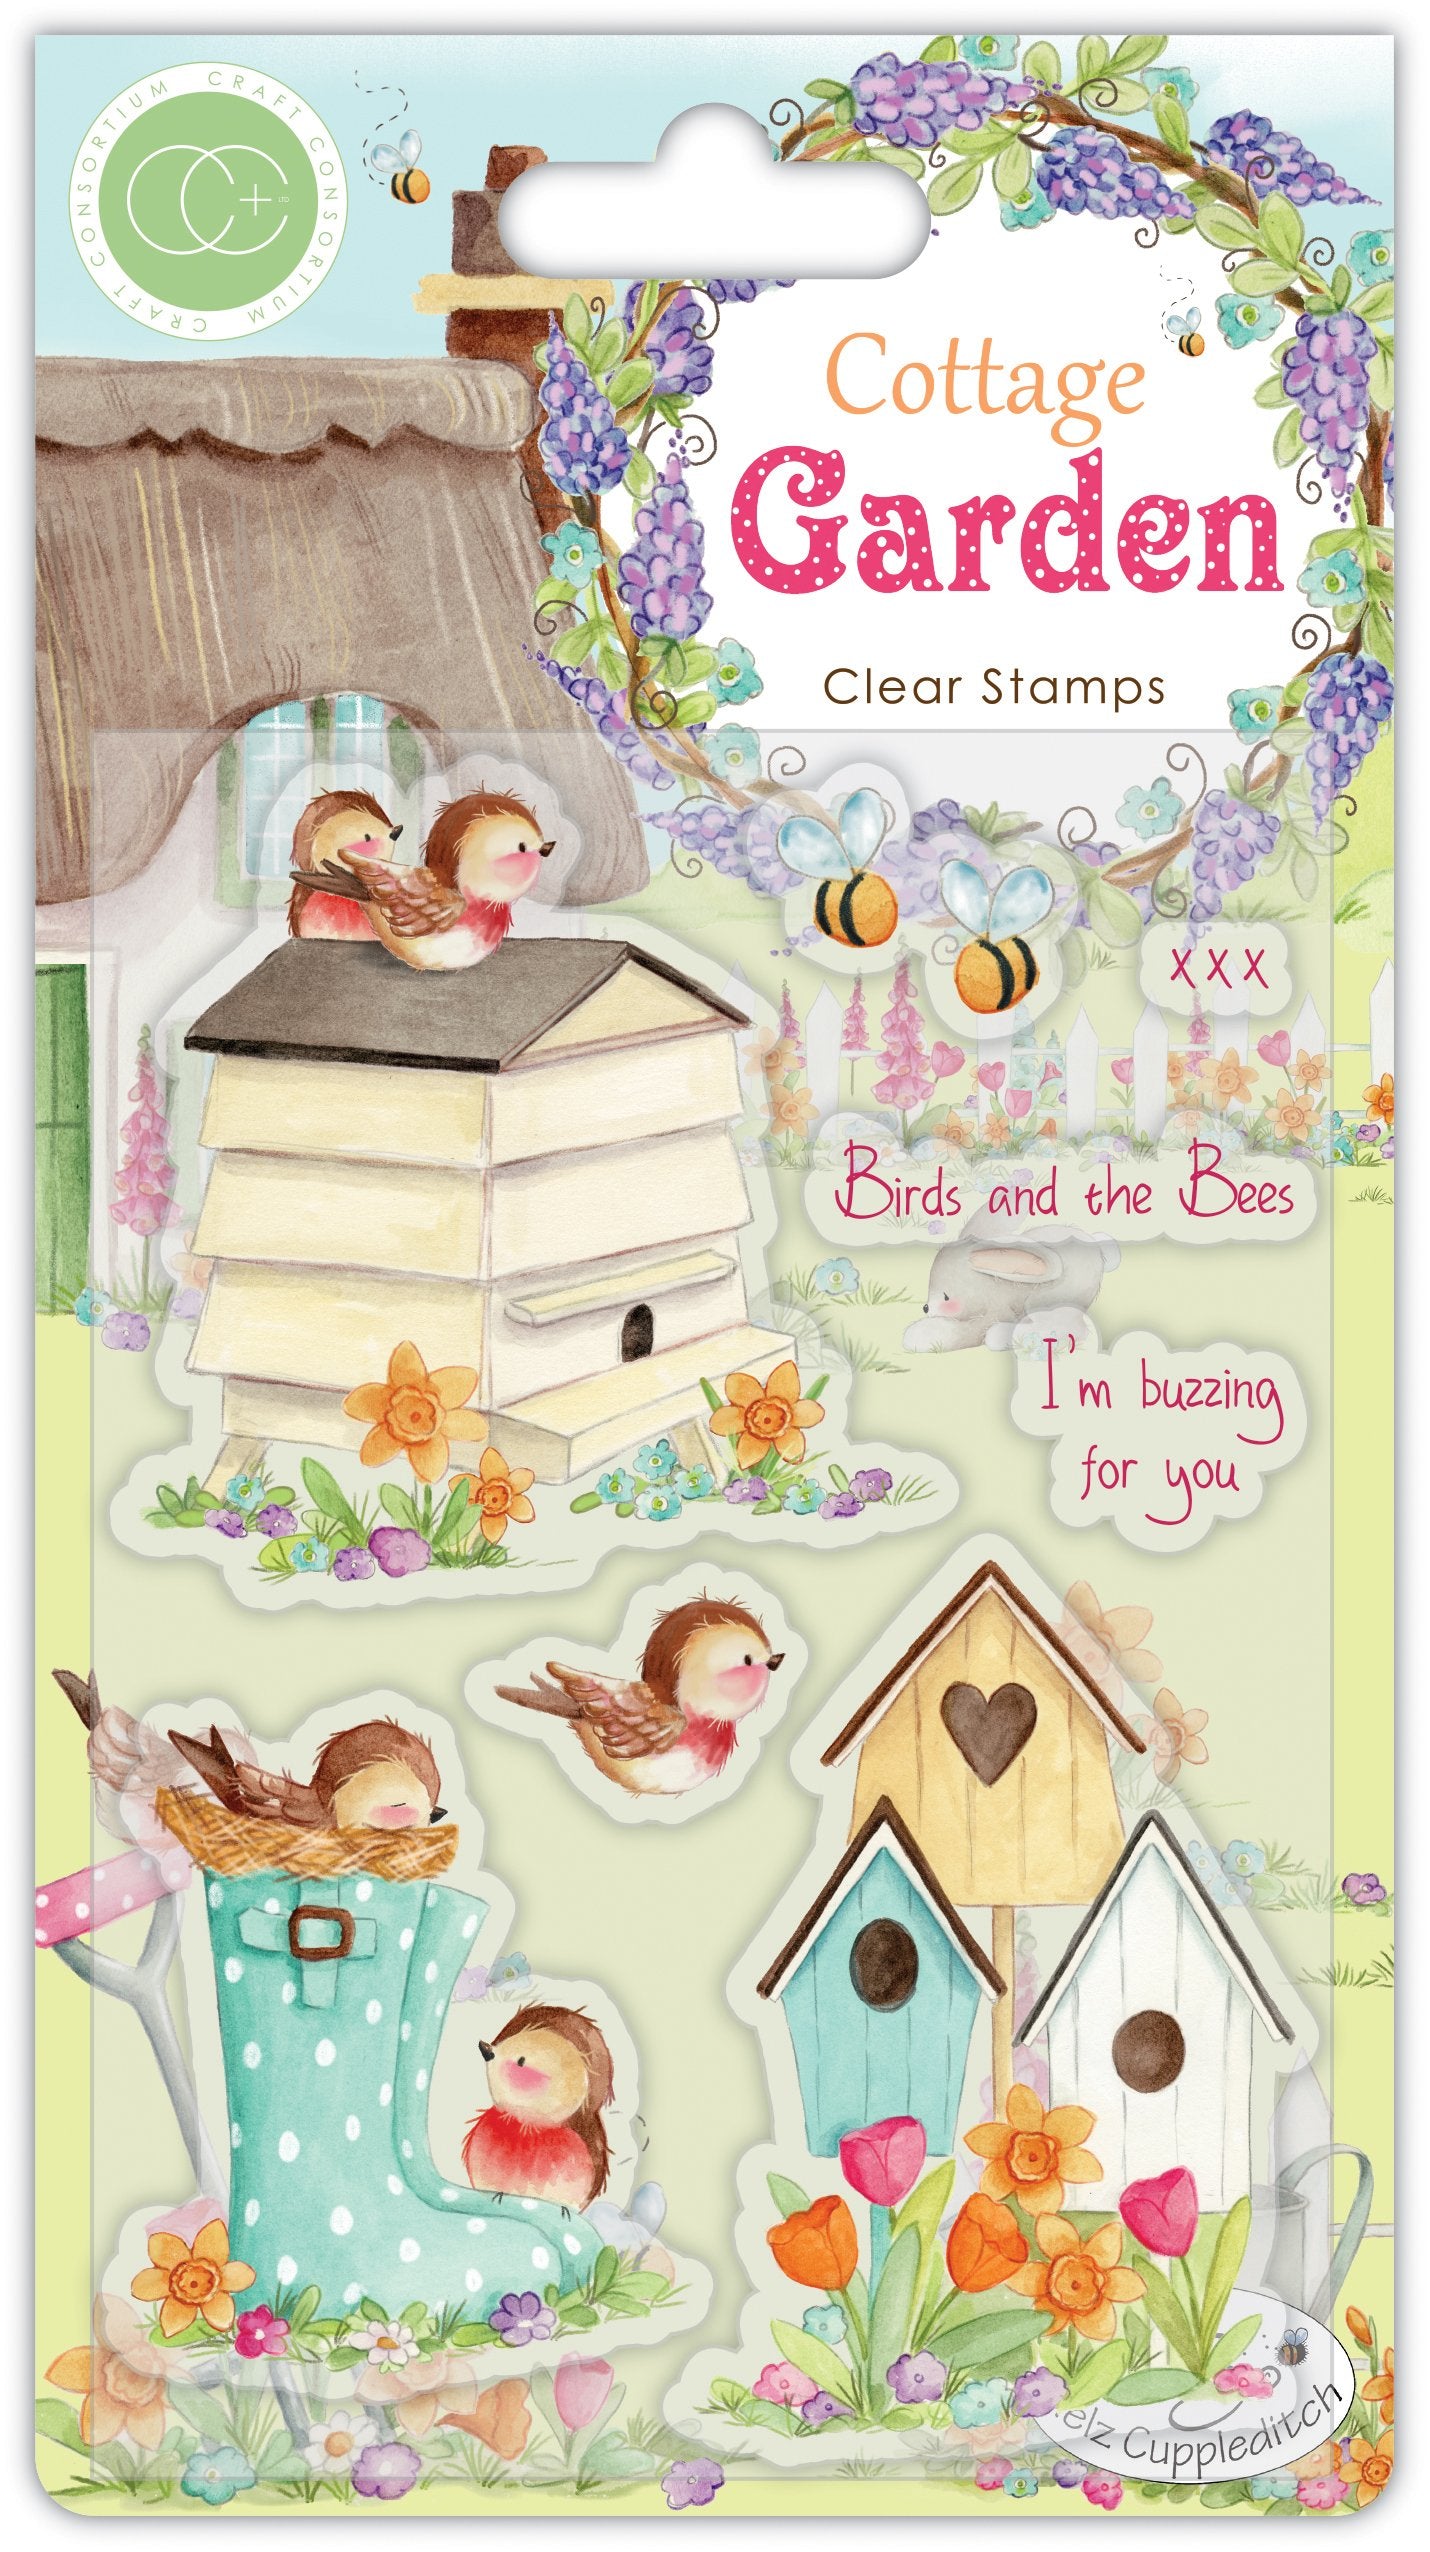 Cottage Garden - Stamp set - Birds and the Bees